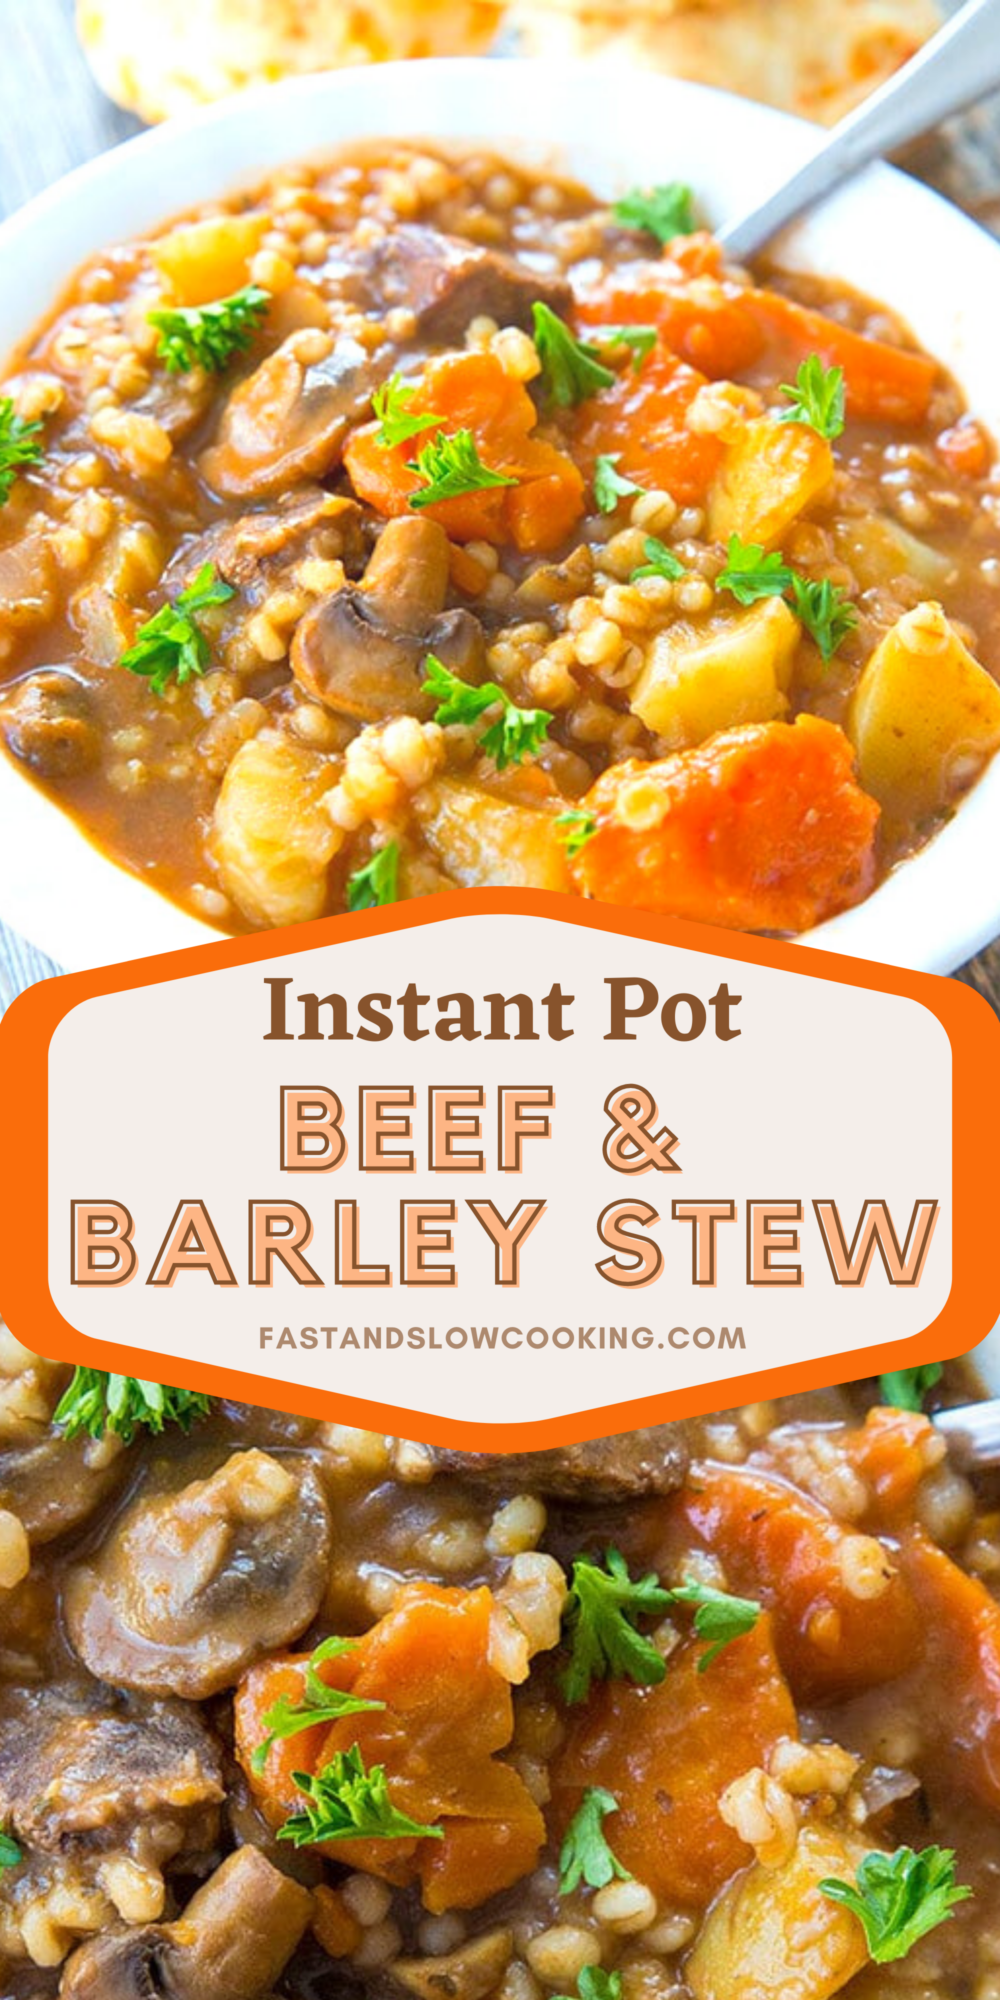 This Instant Pot Beef and Barley stew is the perfect comfort food! Thanks to pressure cooking, the barley cooks up faster - meaning you get dinner on the table in no time at all!